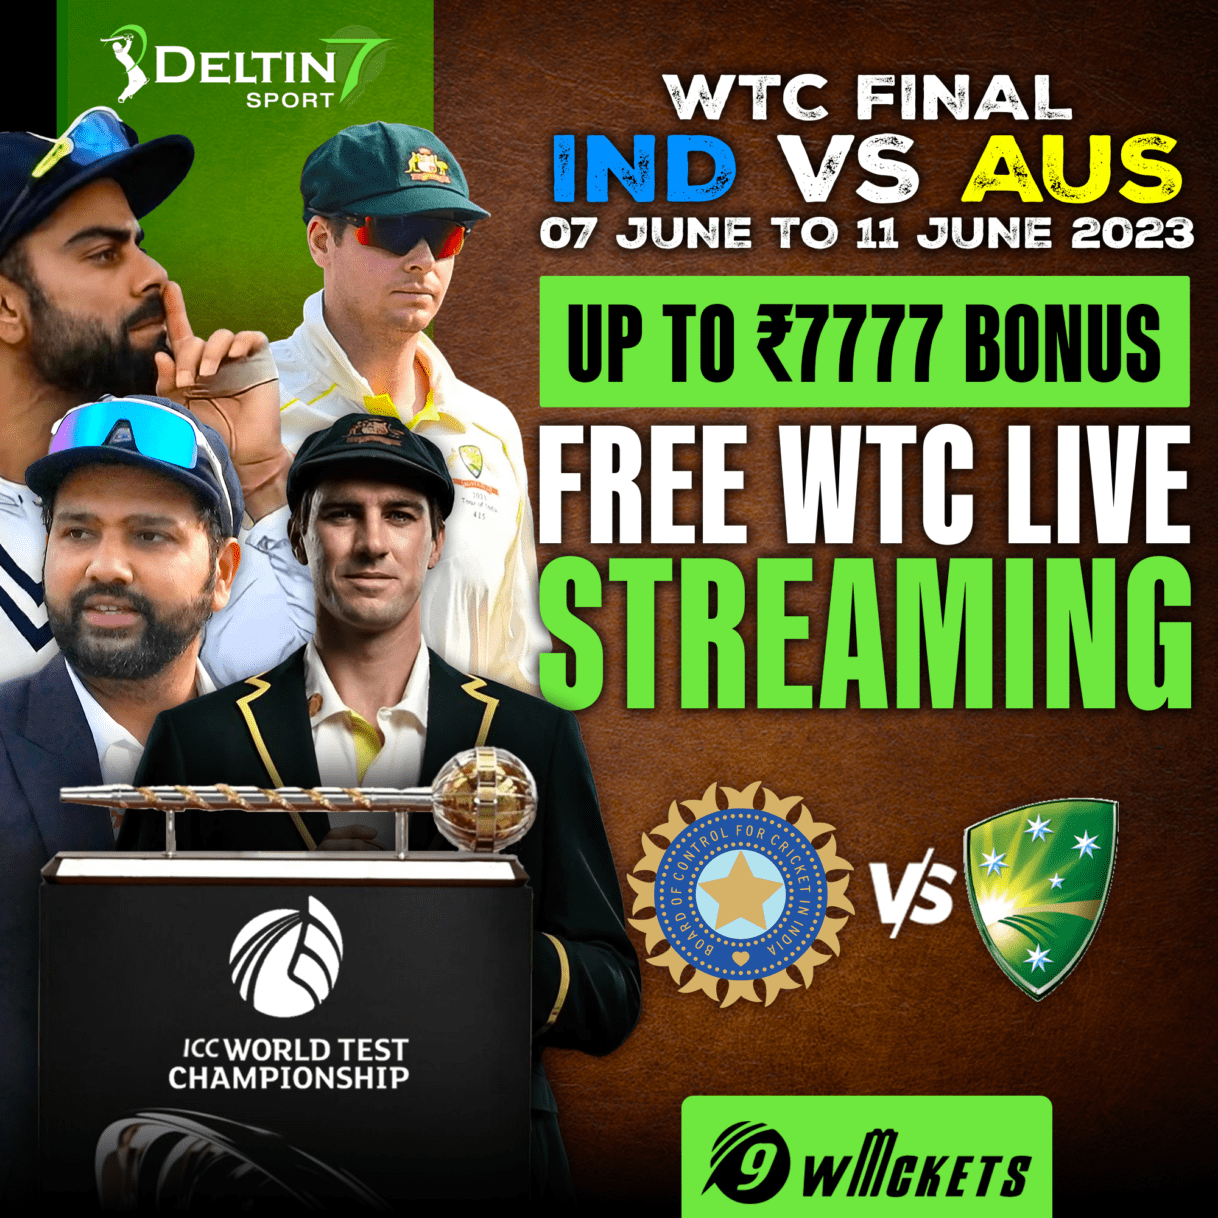 How to watch WTC final streaming for FREE?